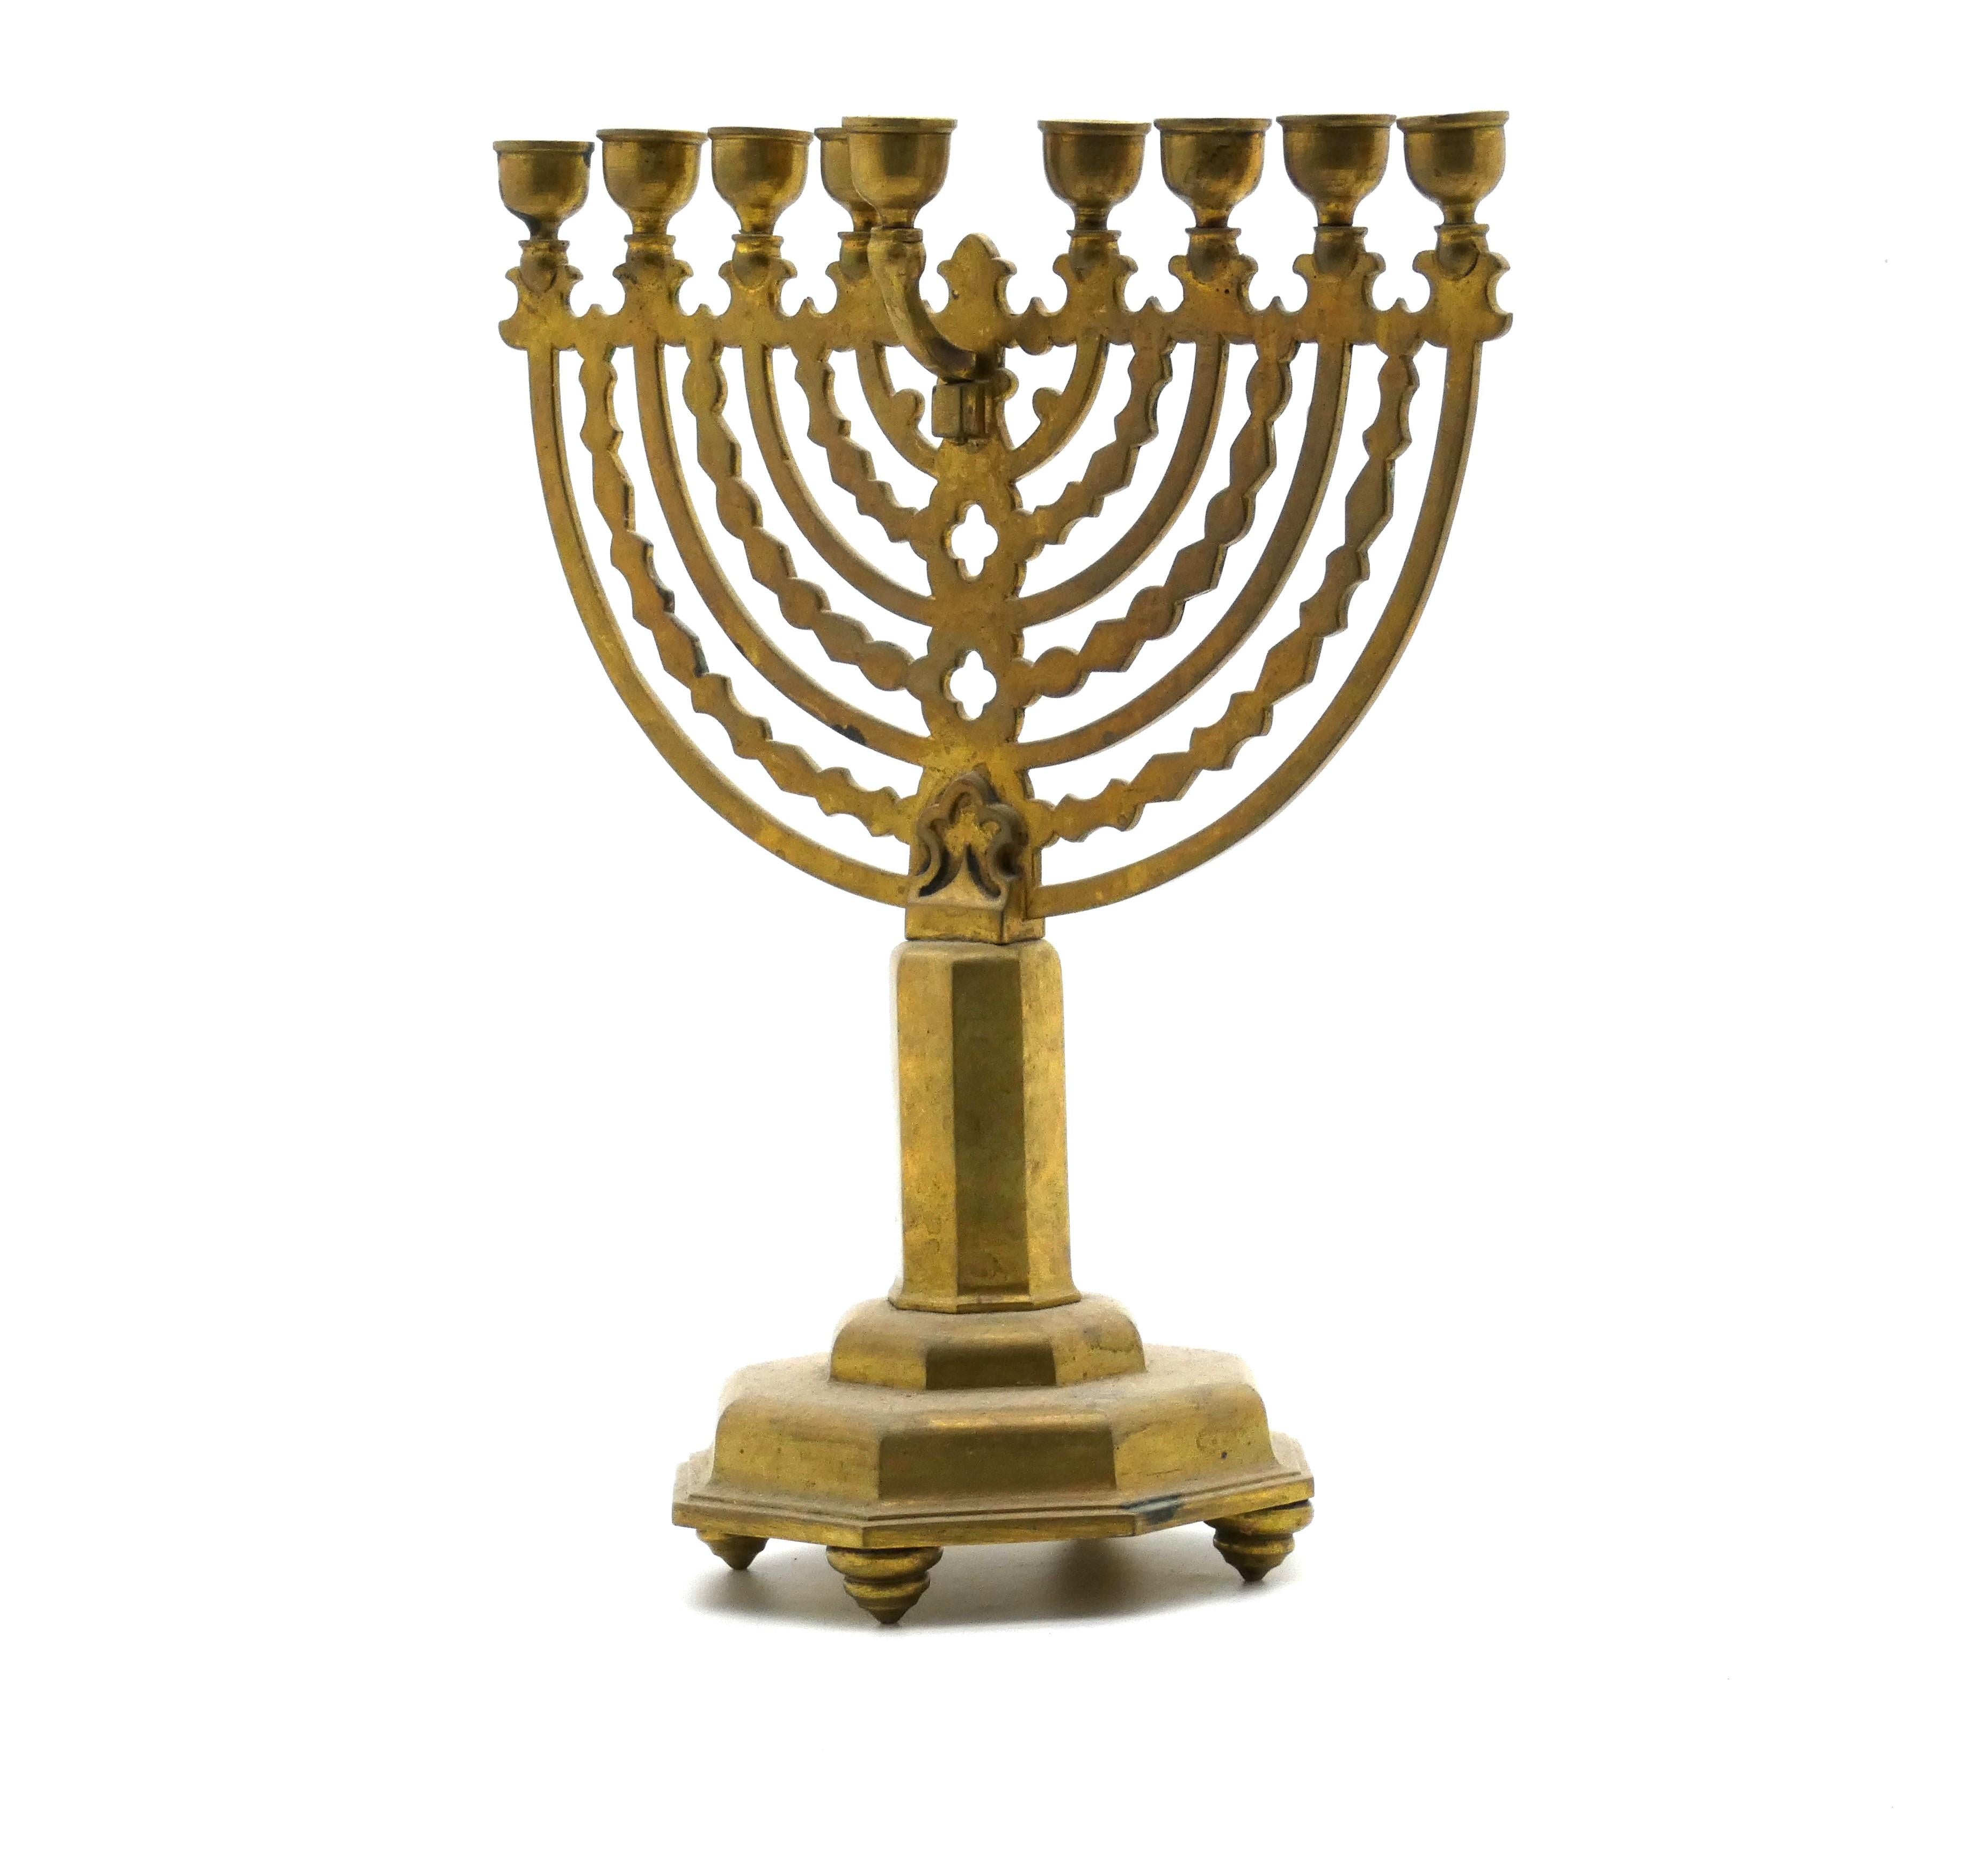 A German Brass Hanukkah Menorah early 20th century In Good Condition For Sale In New York, NY